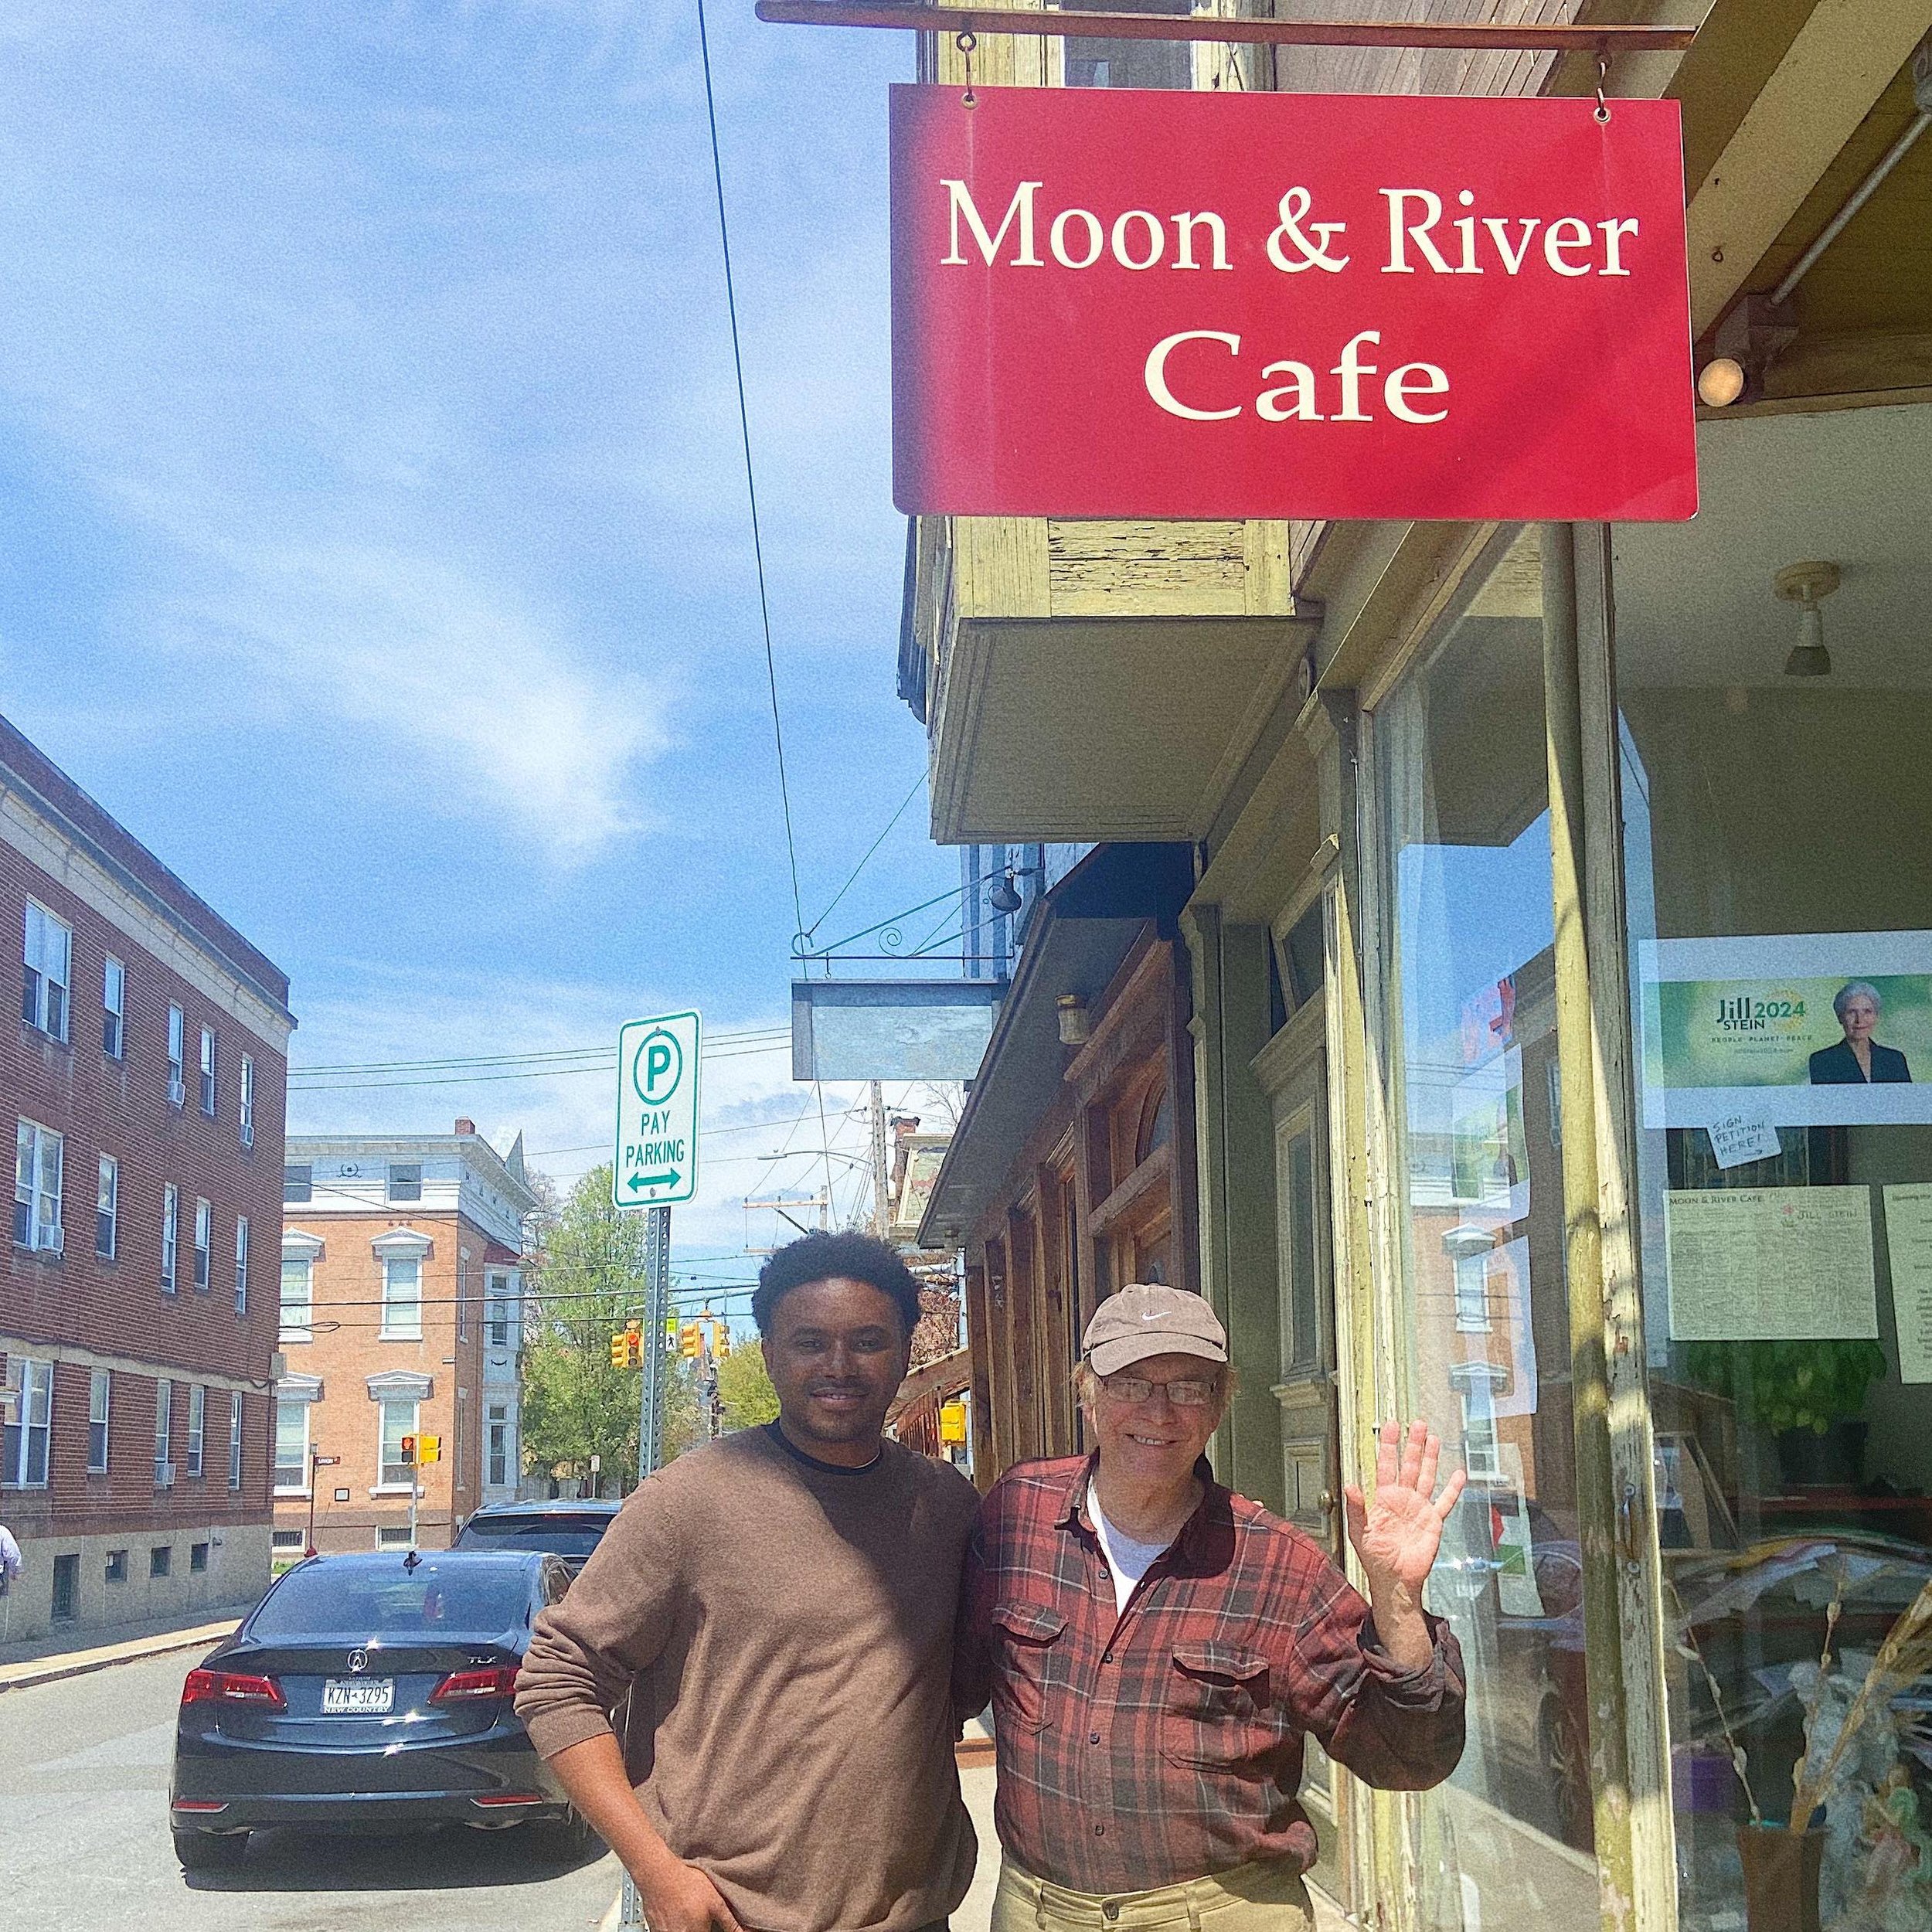 Today makes 20 years since the first day the Moon and River Cafe opened its doors. Thank you to everyone who makes this place so special. Thank you to the musicians and artists that give this place life. See you all soon!